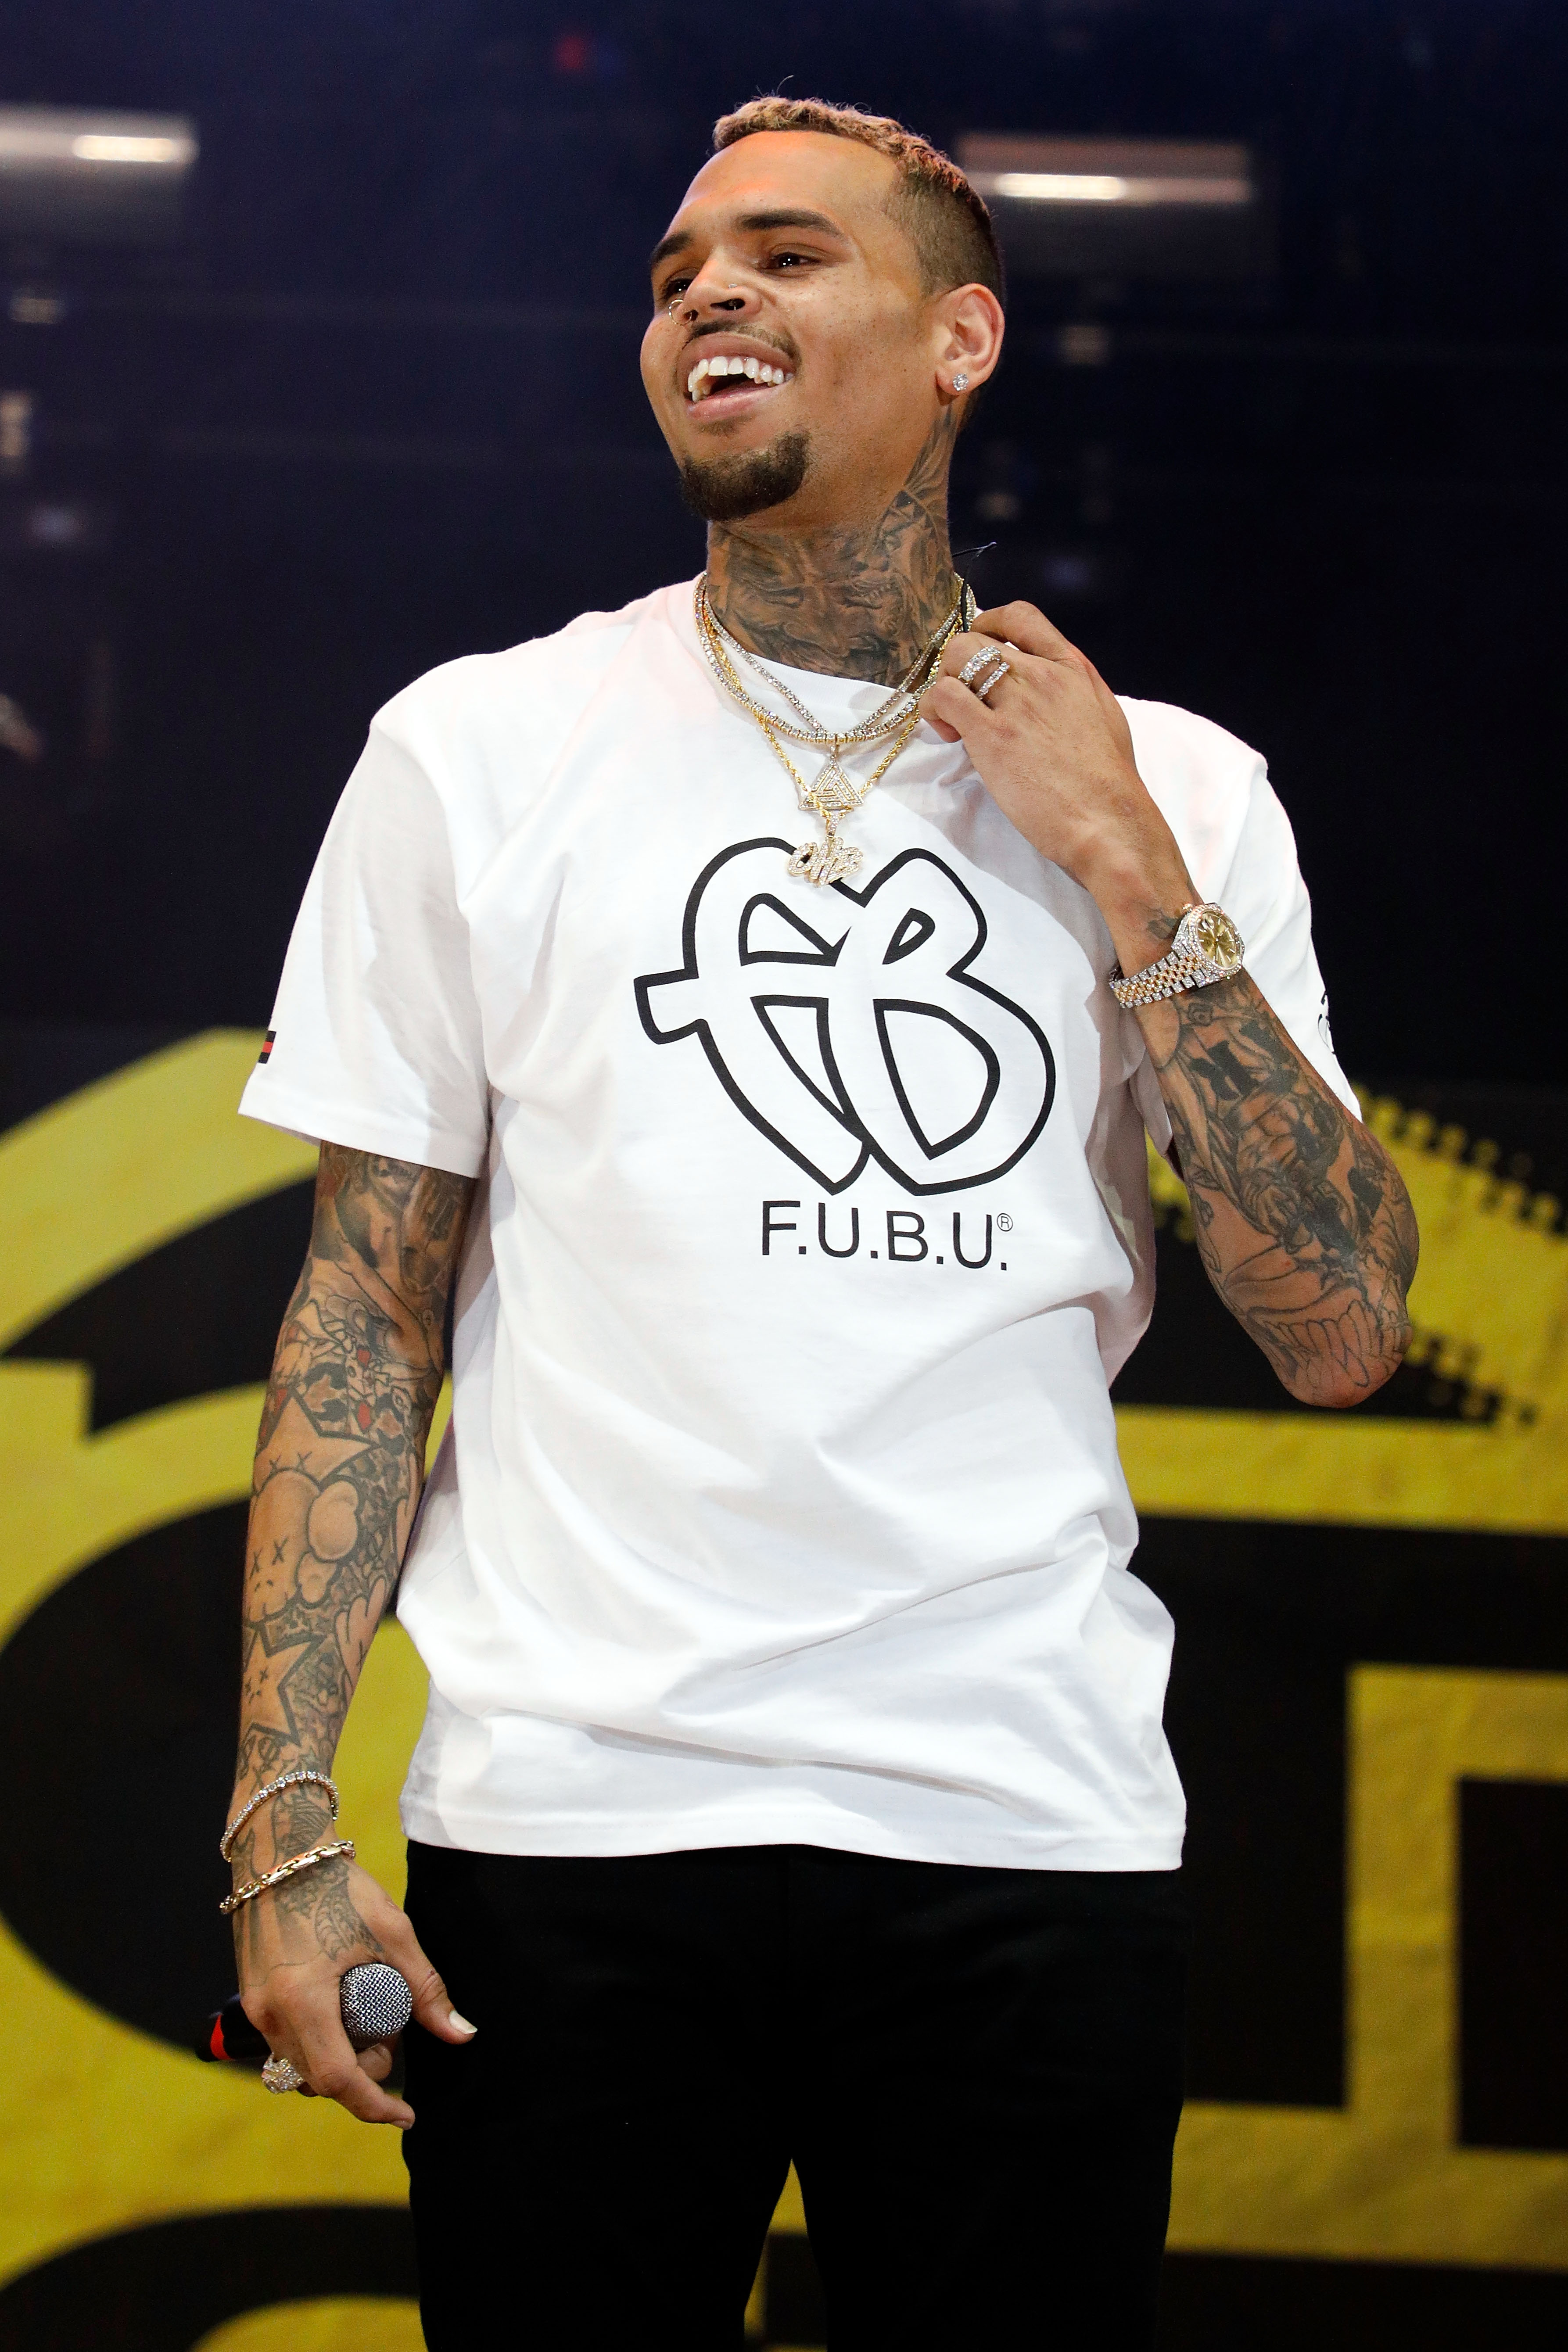 Chris Brown performs during the 2017 Hot 97 Summer Jam at MetLife Stadium on June 11, 2017 in East Rutherford, New Jersey | Photo: Getty Images